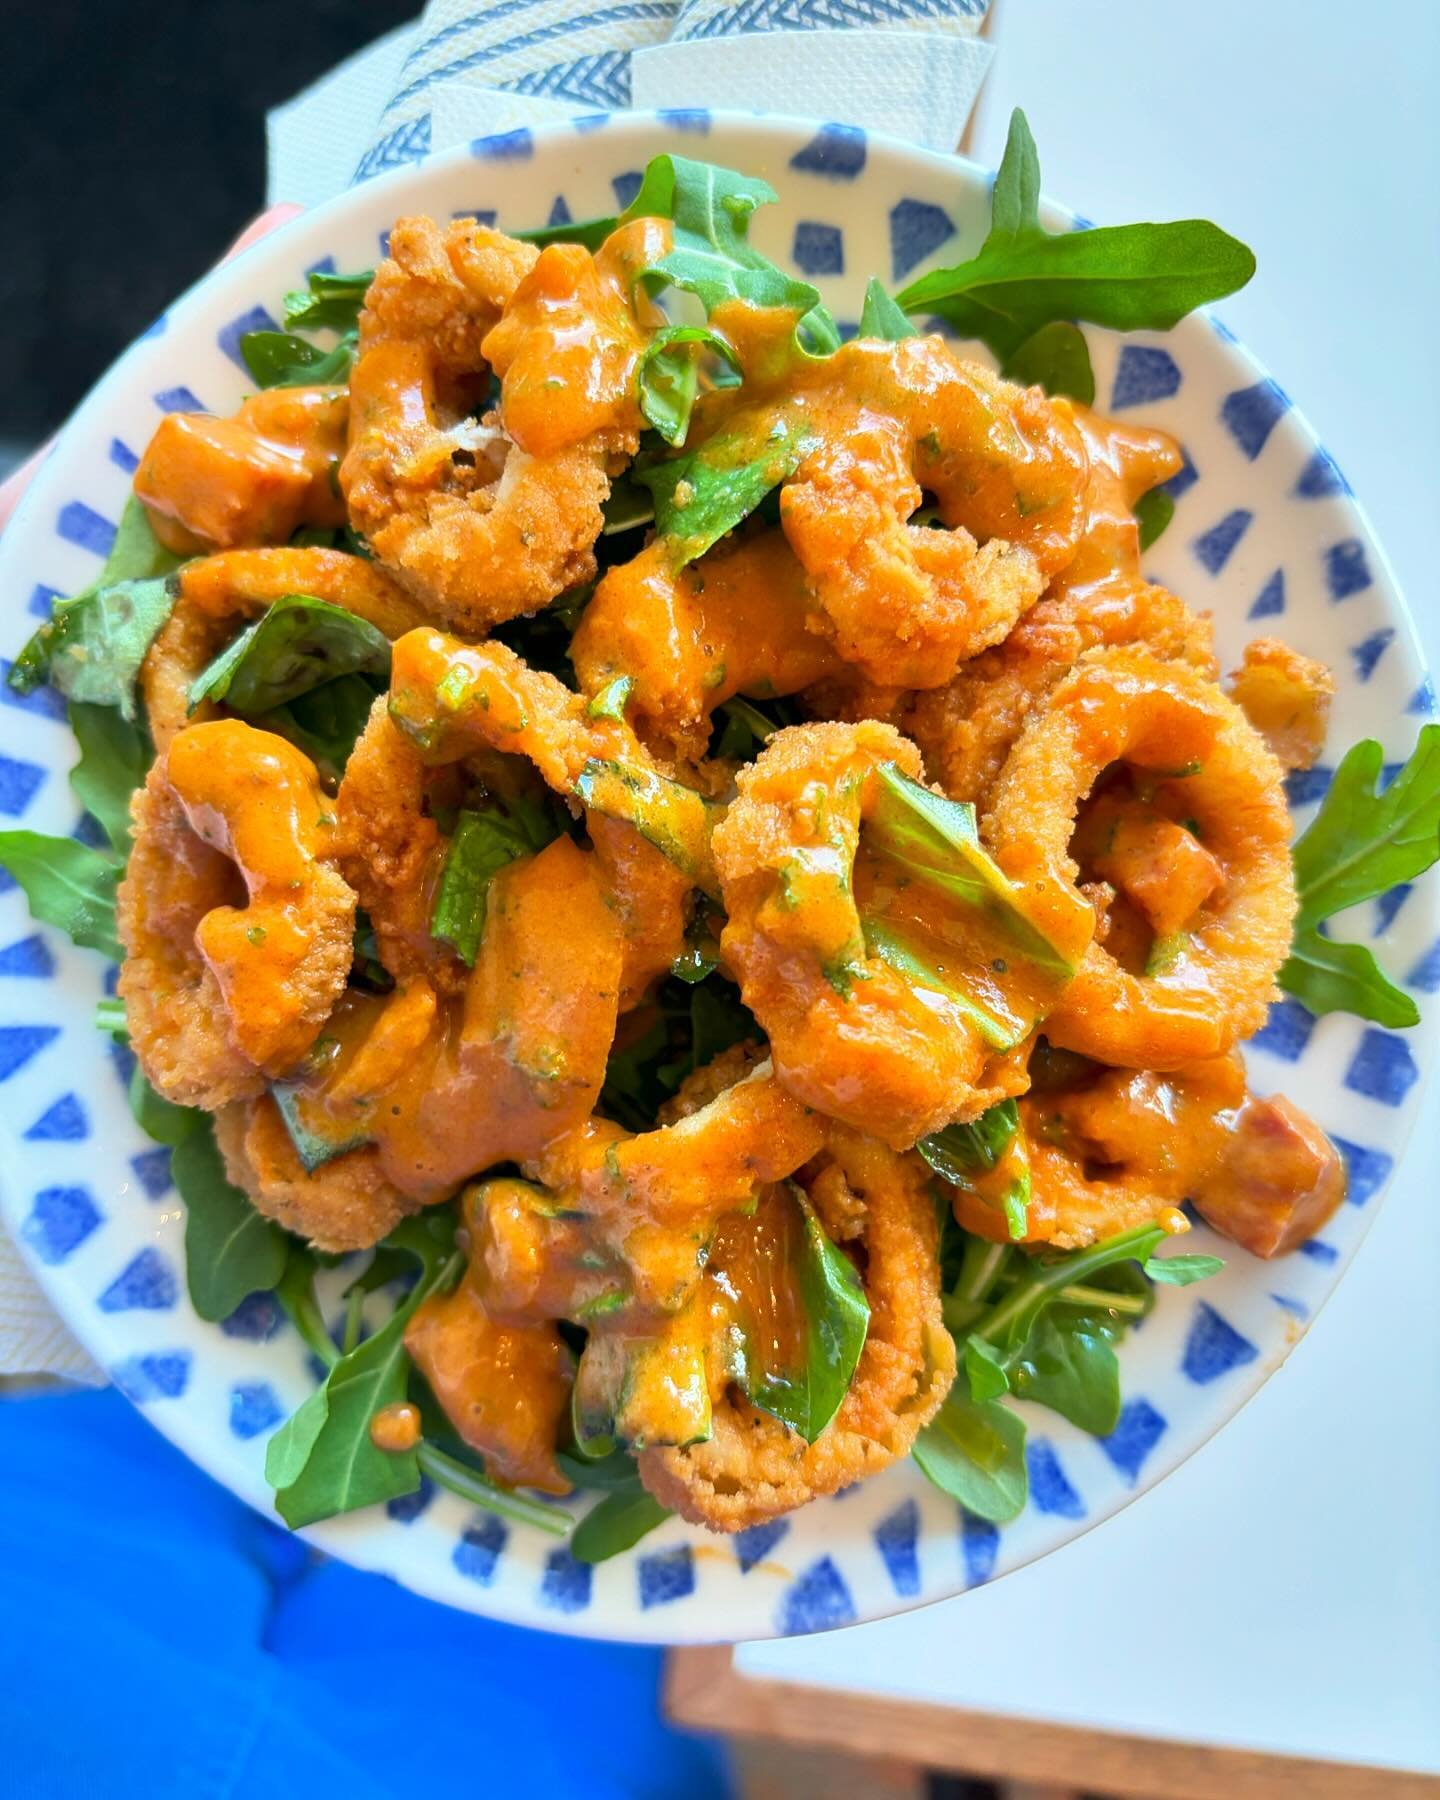 Fried Calamari with spicy pepperoni sauce, basil, and arugula 🦑🤤 (breaded in chickpea flour&mdash;so it&rsquo;s gf!)

Bar snacks start at 4pm | See you at aperitivo hour! 🥂

#happyhourcle #glutenfree #clevelandhappyhour